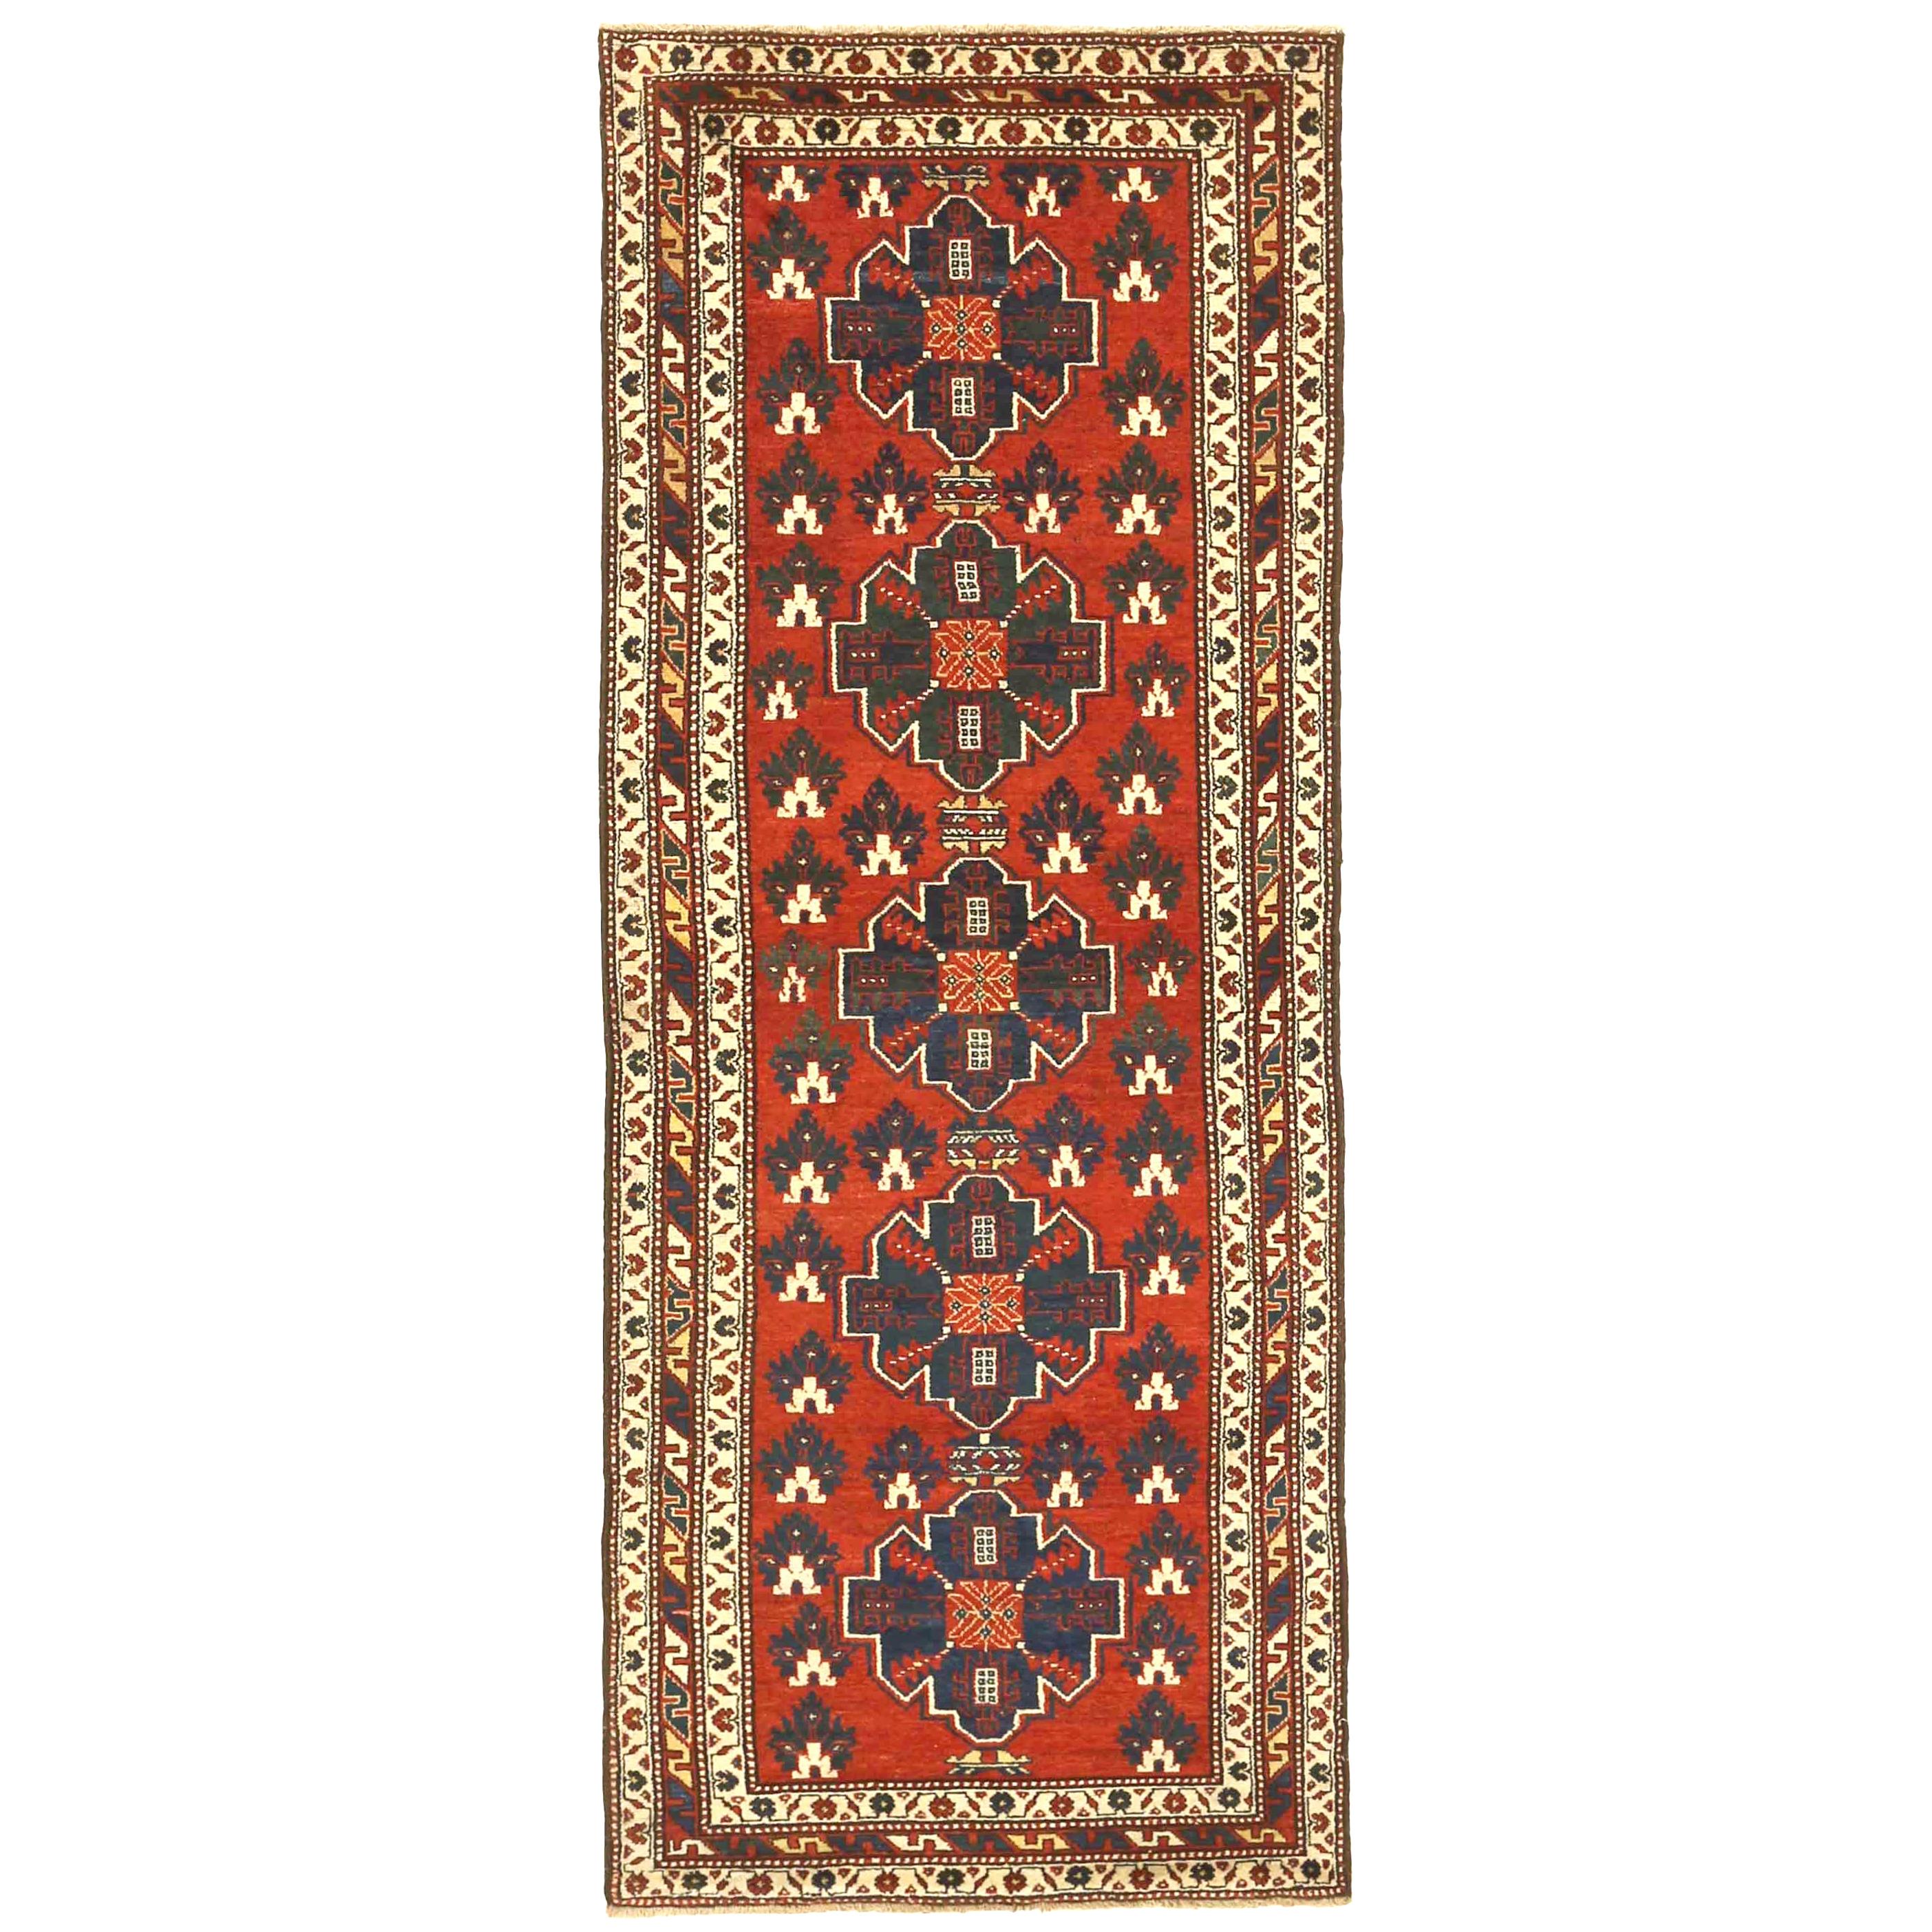 Antique Persian runner rug handwoven from the finest sheep’s wool. It’s colored with all-natural vegetable dyes that are safe for humans and pets. It’s a traditional Bakhtiar design handwoven by expert artisans. It’s a lovely runner rug that can be